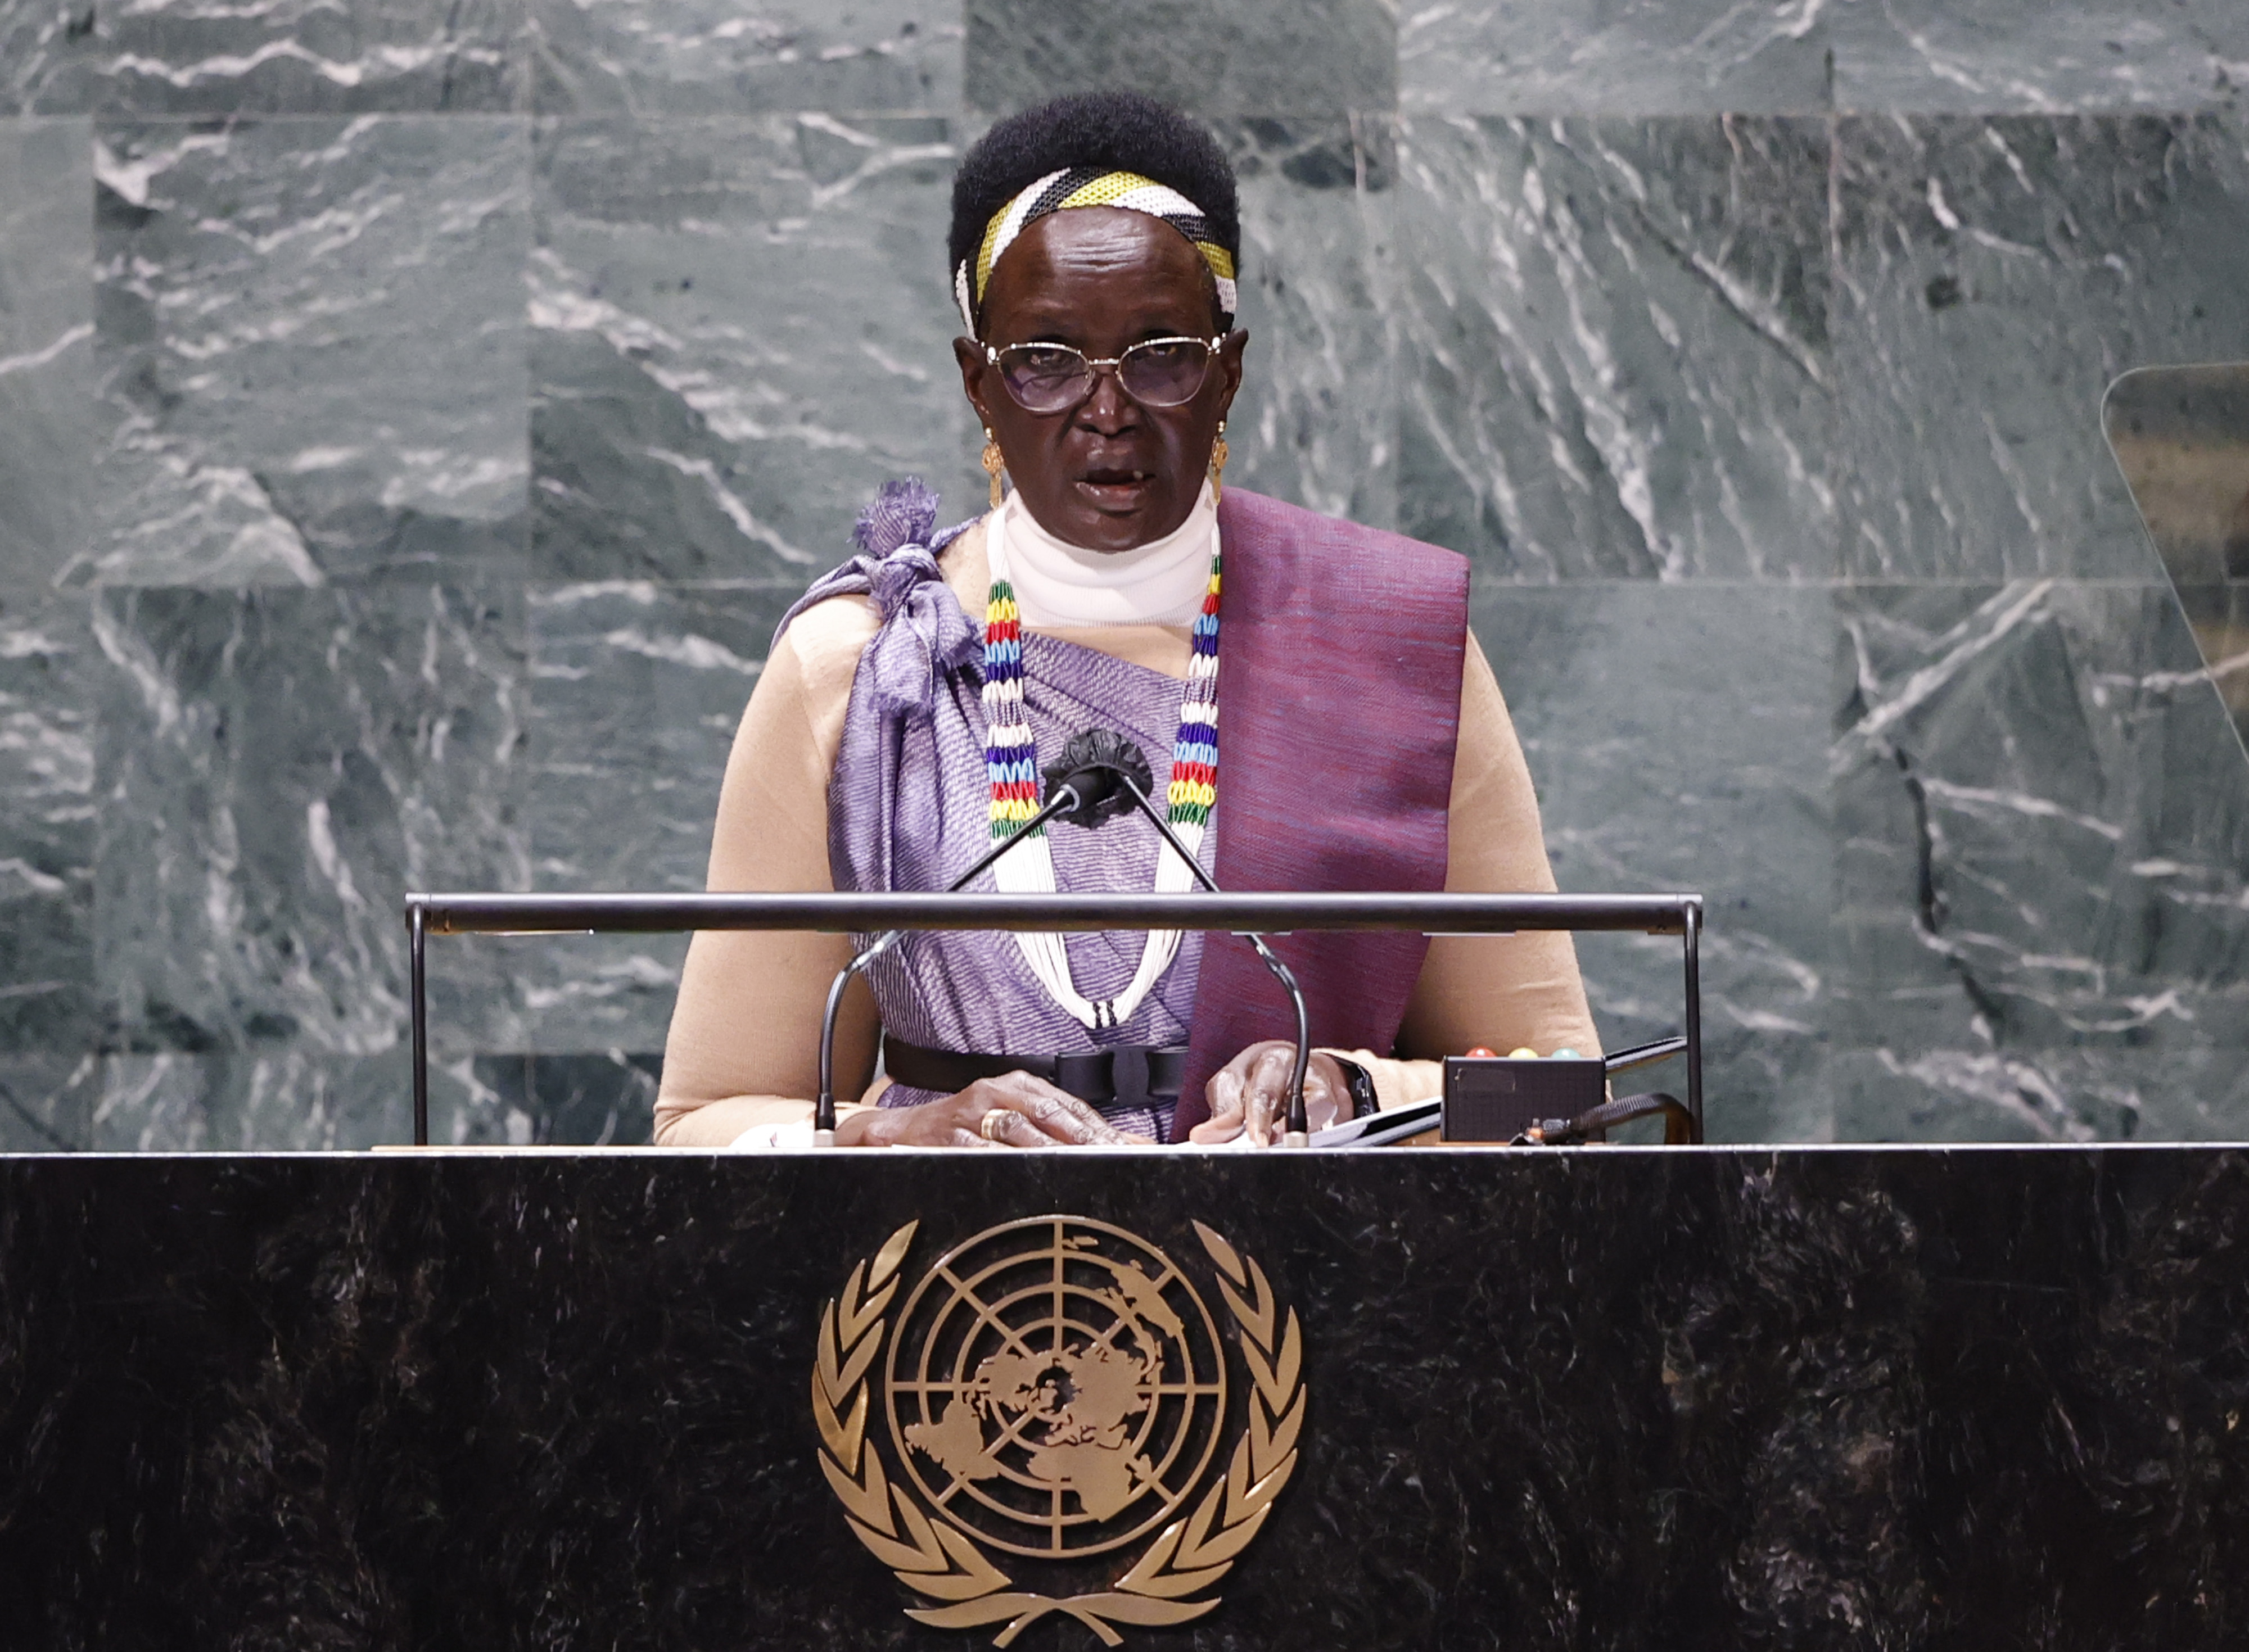 NEW YORK, NEW YORK - SEPTEMBER 24: Rebecca Nyandeng De Mabior, Vice President of South Sudan addresses the 76th Session of the U.N. General Assembly at U.N. headquarters on September 24, 2021 in New York City. More than 100 heads of state or government are attending the session in person, although the size of delegations are smaller due to the Covid-19 pandemic. (Photo by John Angelillo - Pool/Getty Images)